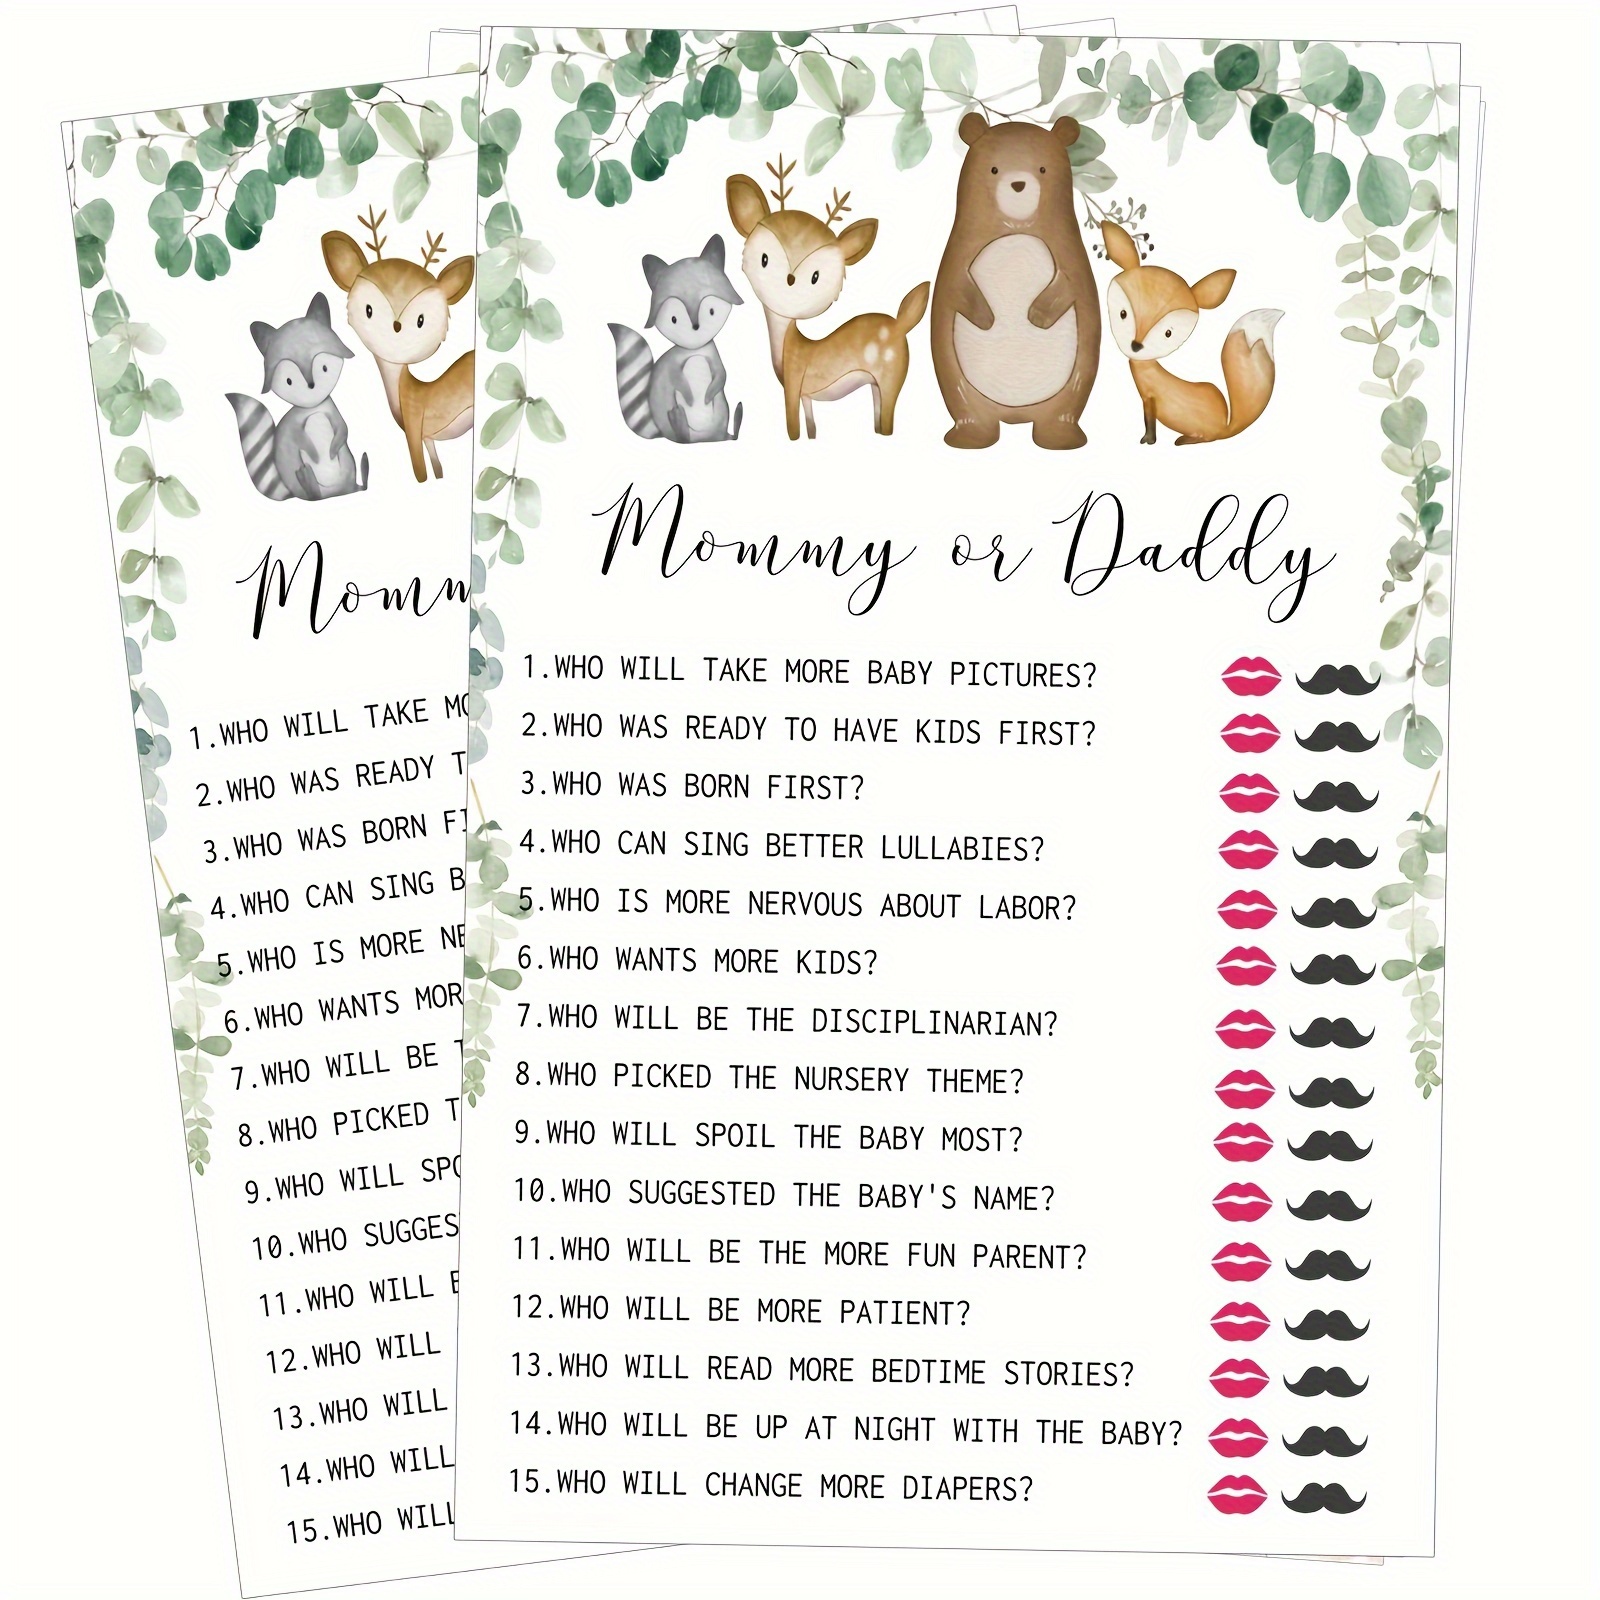 

20pcs Mommy Or Daddy Who Said It Game Fun Baby Shower Game Activity, Gender Reveal Party Boy Or Girl Game